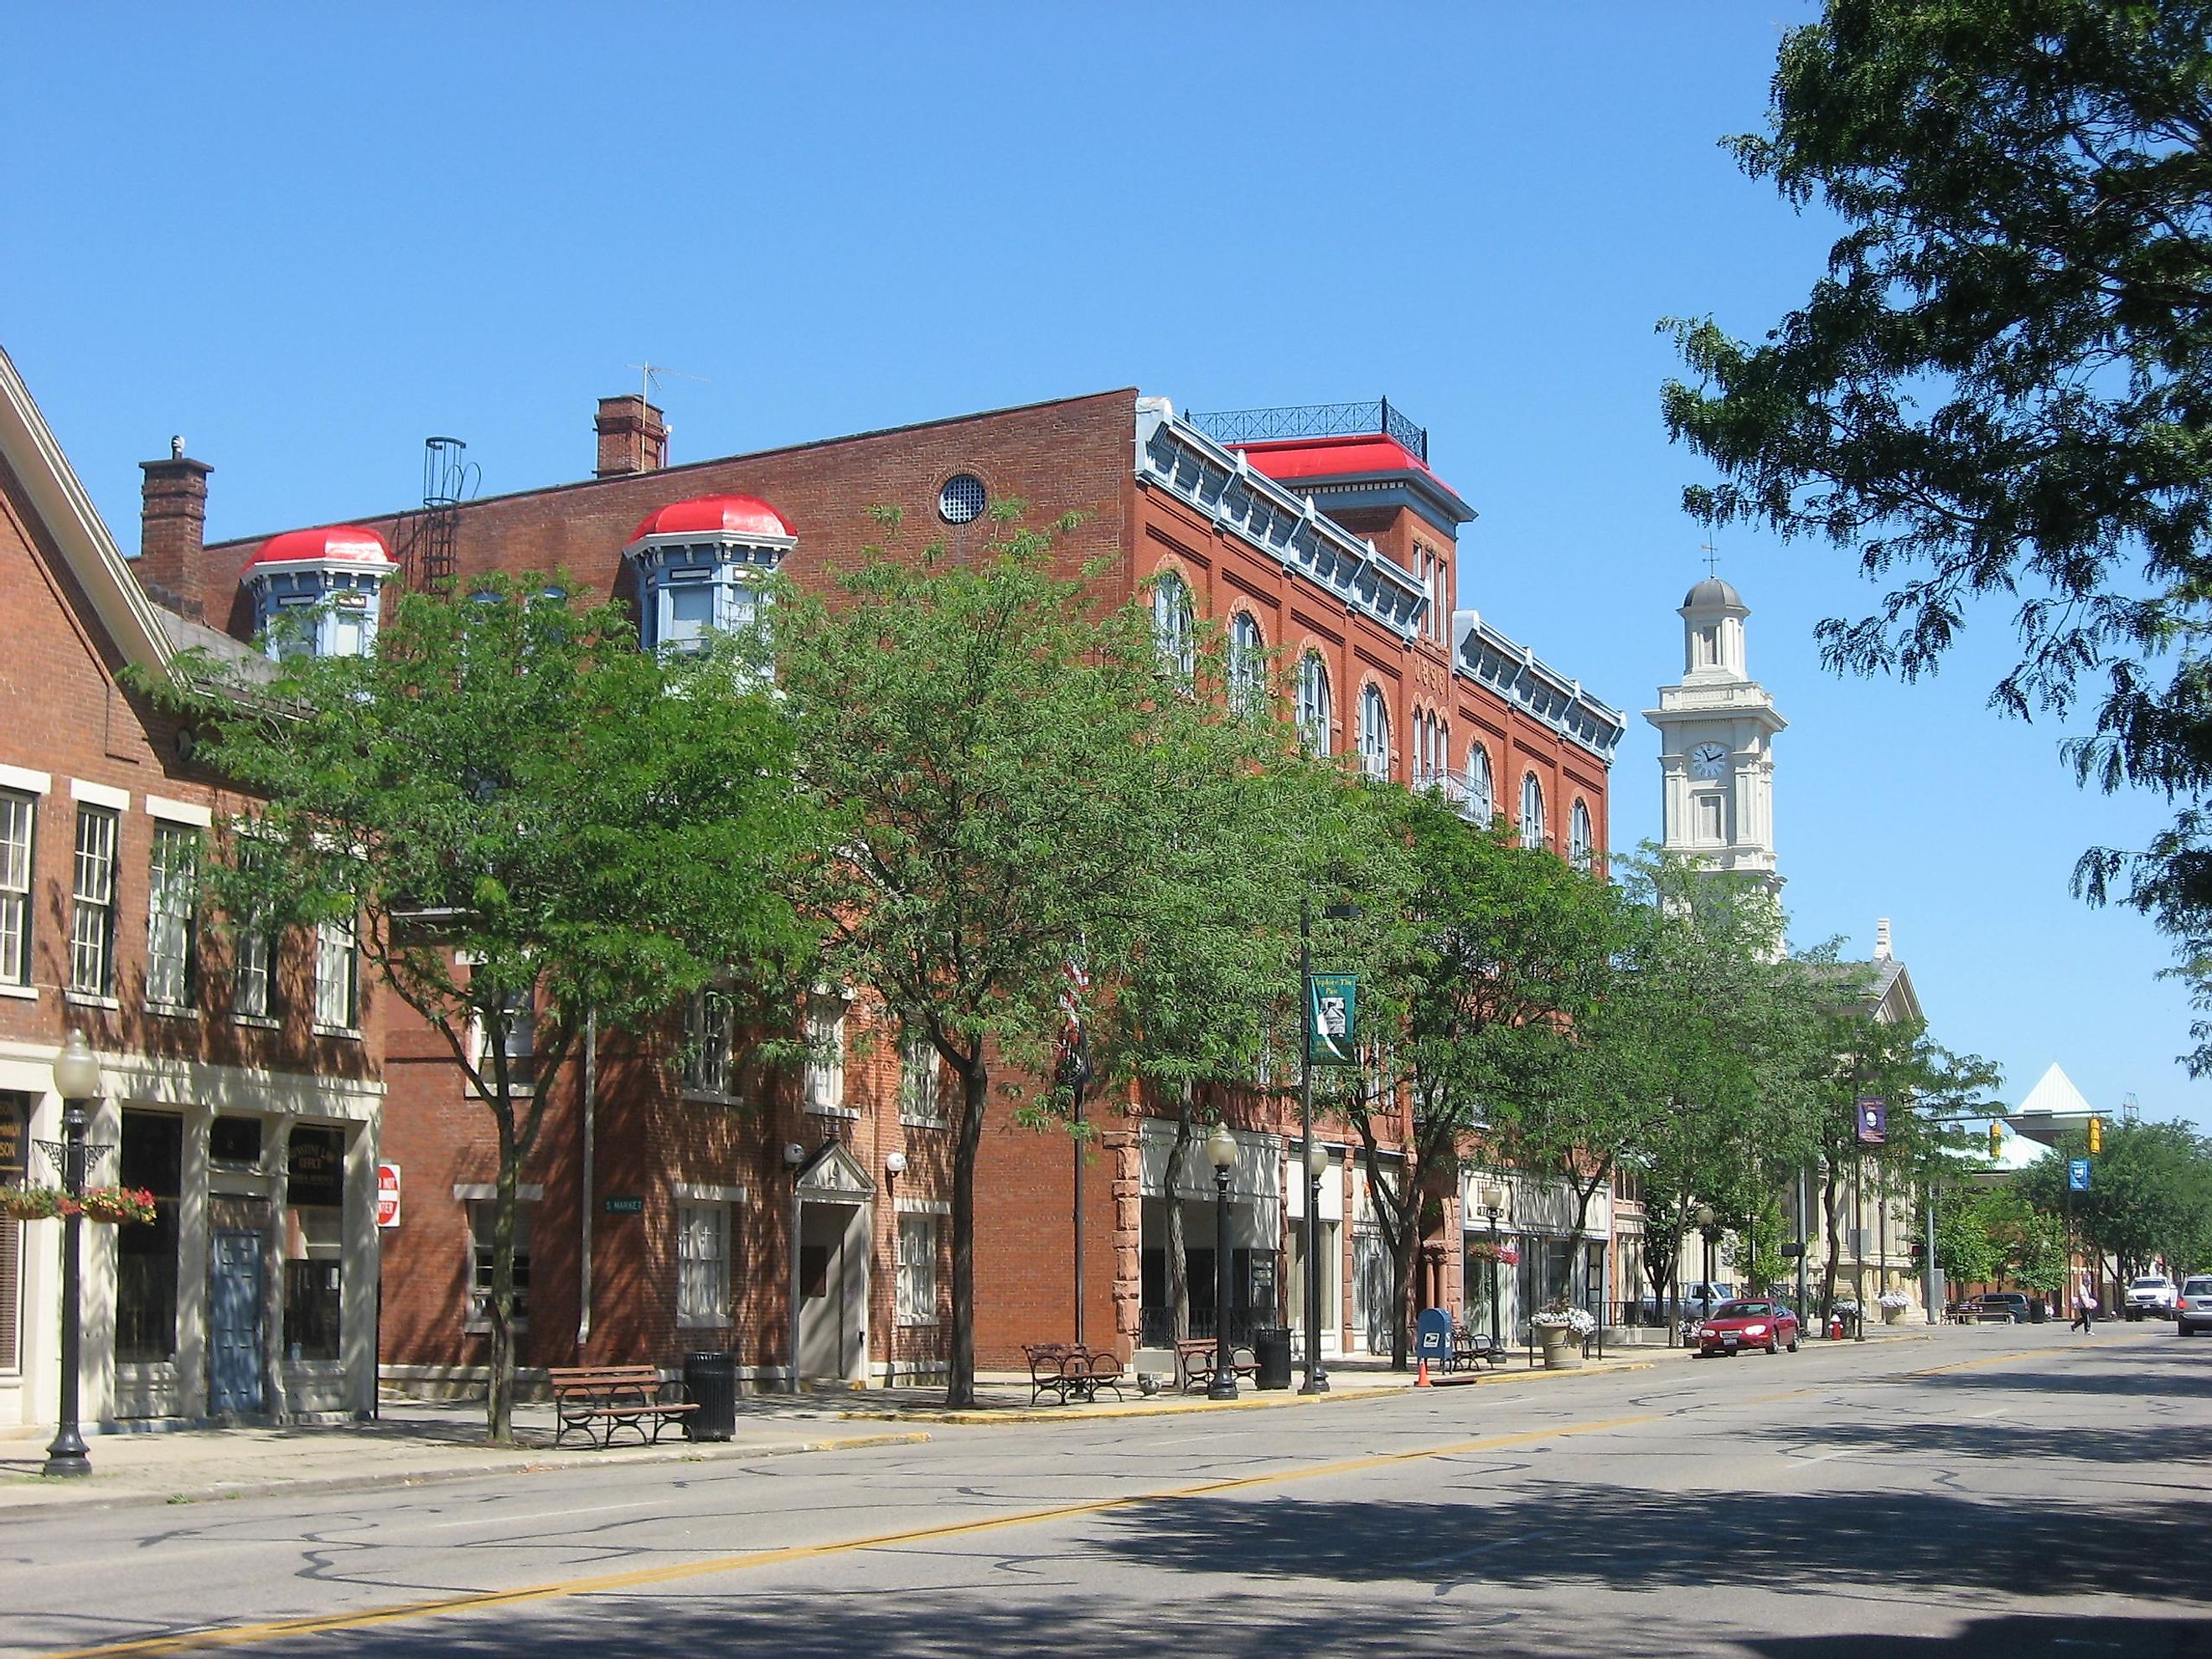 Central business and historic district in Chillicothe, Ohio.